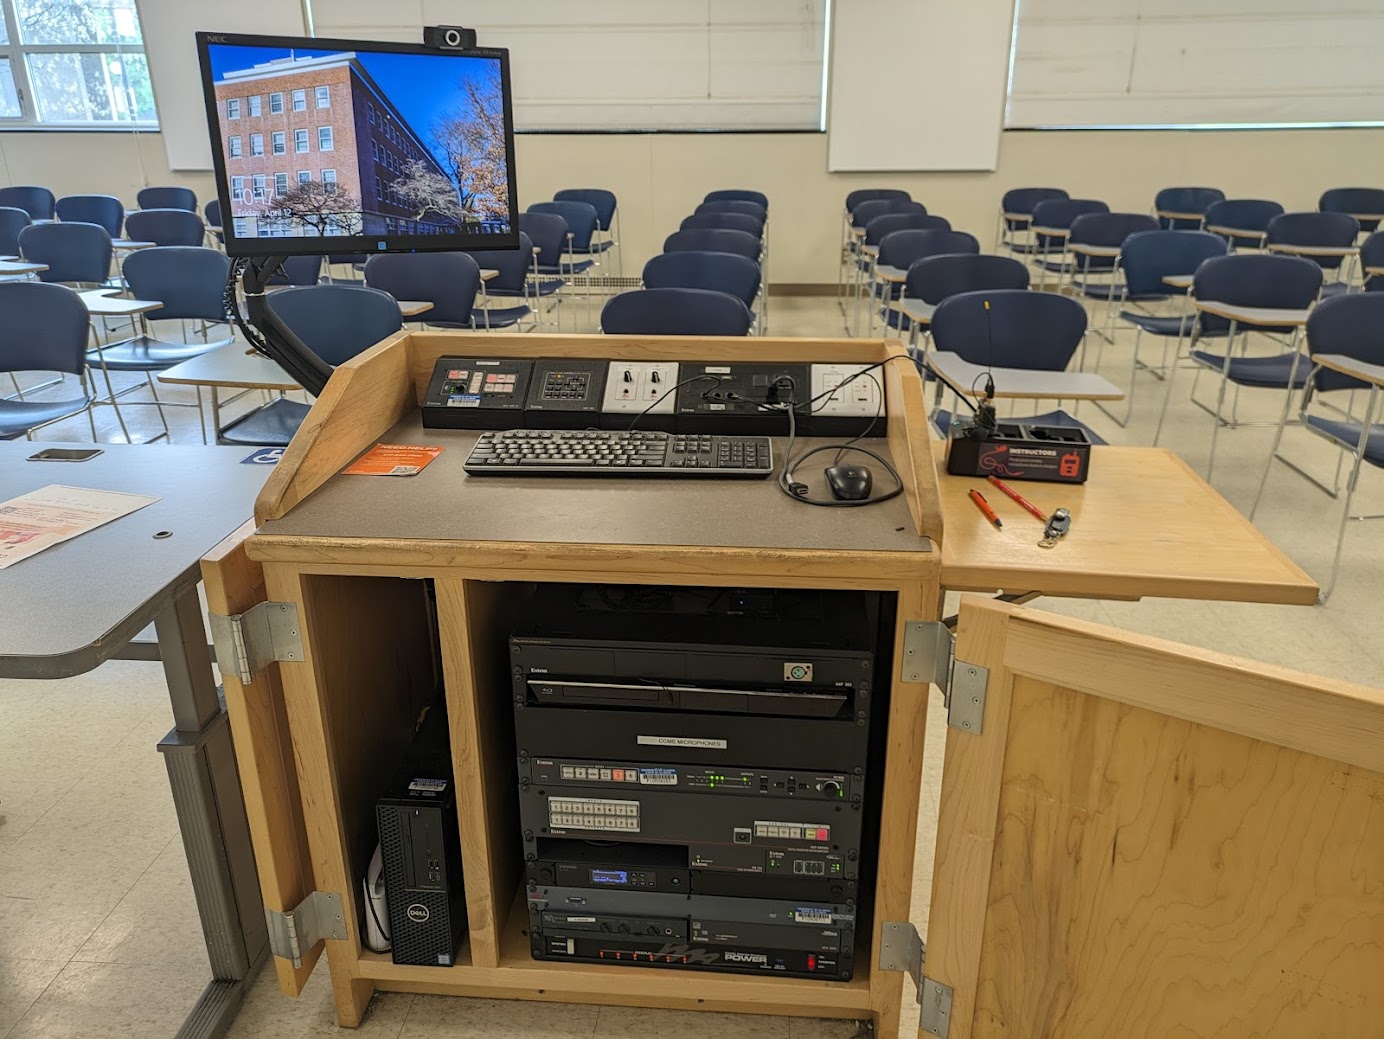 A view of the open cabinet with PC, and HDMI inputs, Blu-ray DVD player, a push button controller, audio visual rack, rechargeable Wireless Microphone,  and electric screen controls.